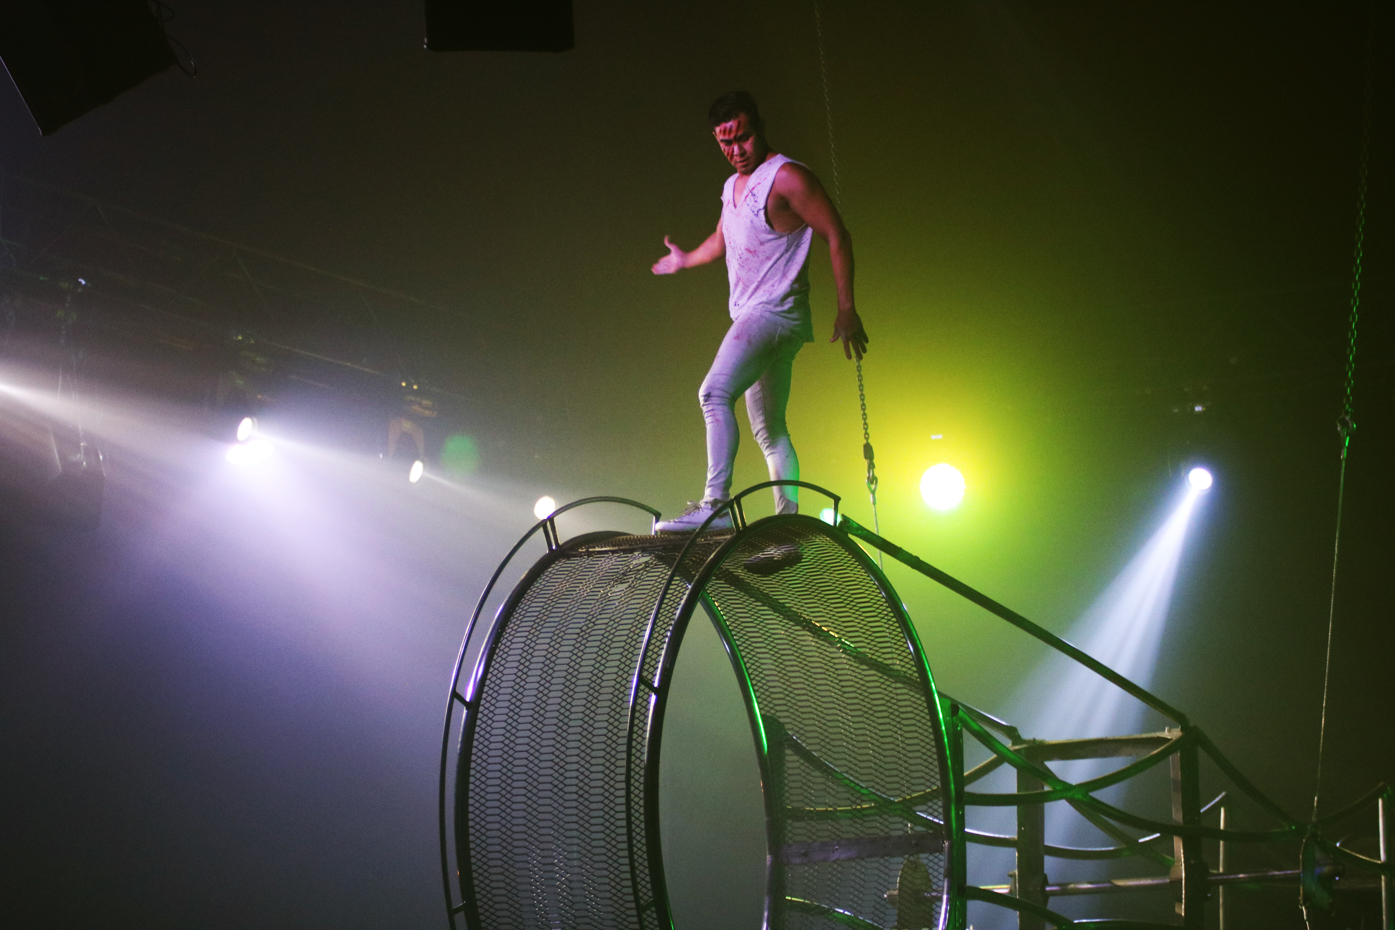 An acrobat leads the final performance of the cirque. He climbed all throughout the contraption, running alongside the outer edge and jumping rope. 